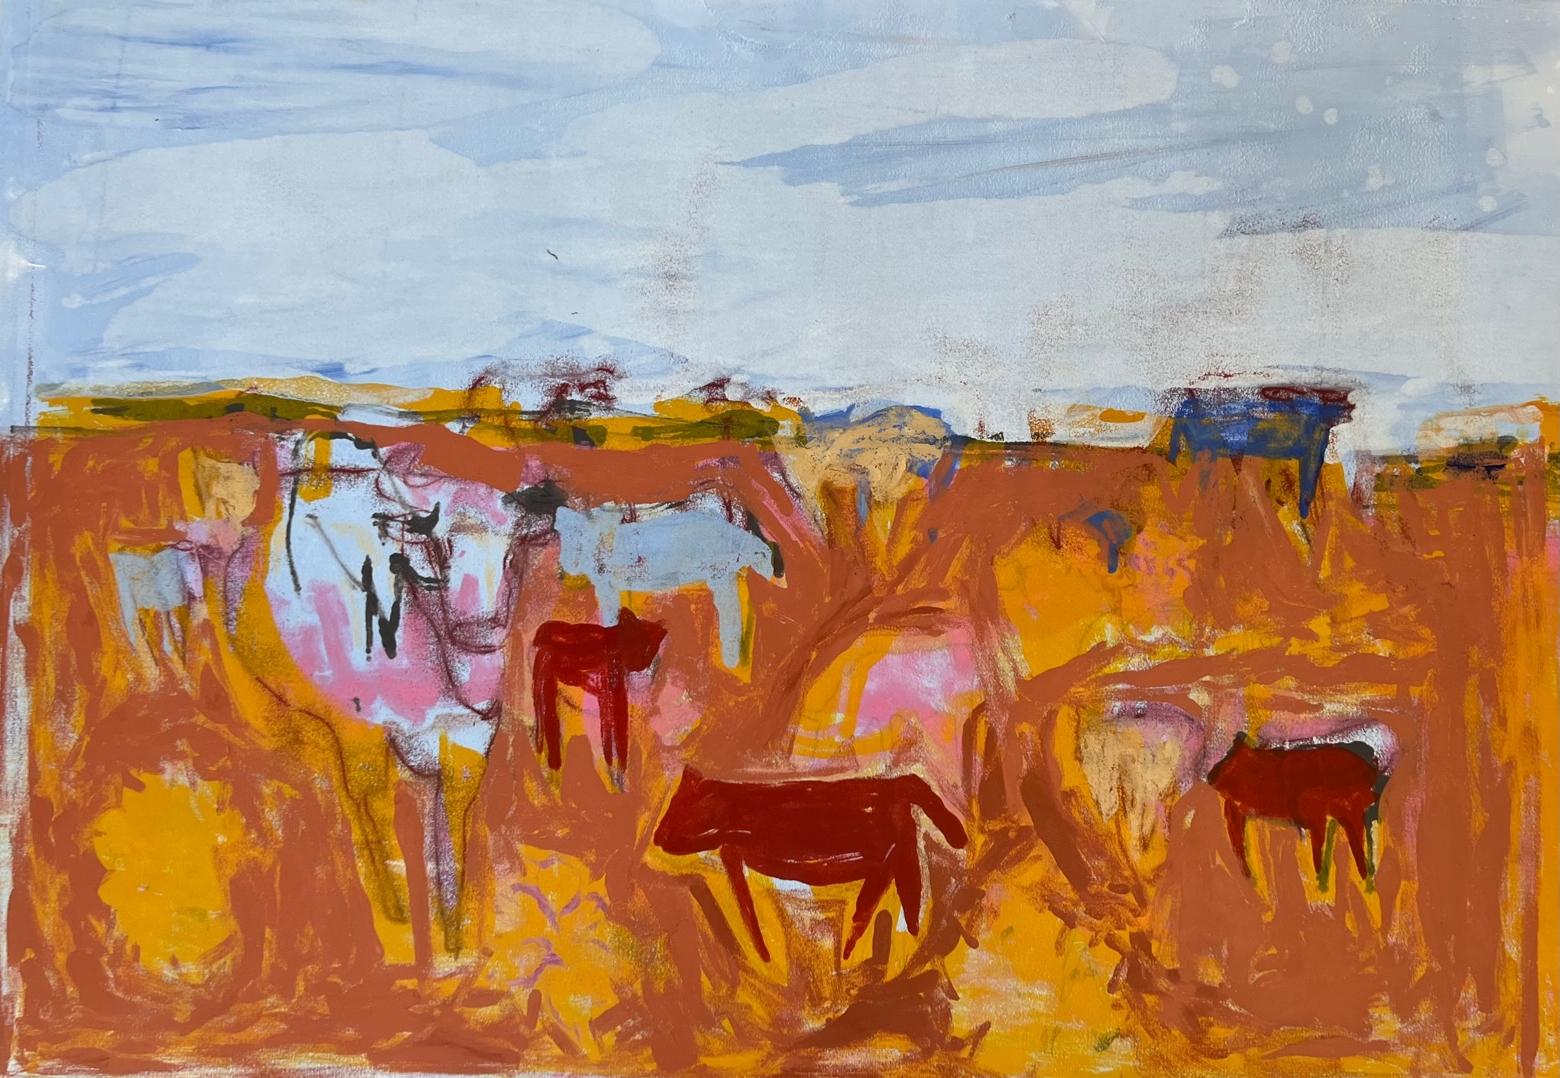 COWS Monotype 31 x 44  Abstract Figurative Art   Framed 37 x 50  Cattle - Mixed Media Art by Charlotte Seifert